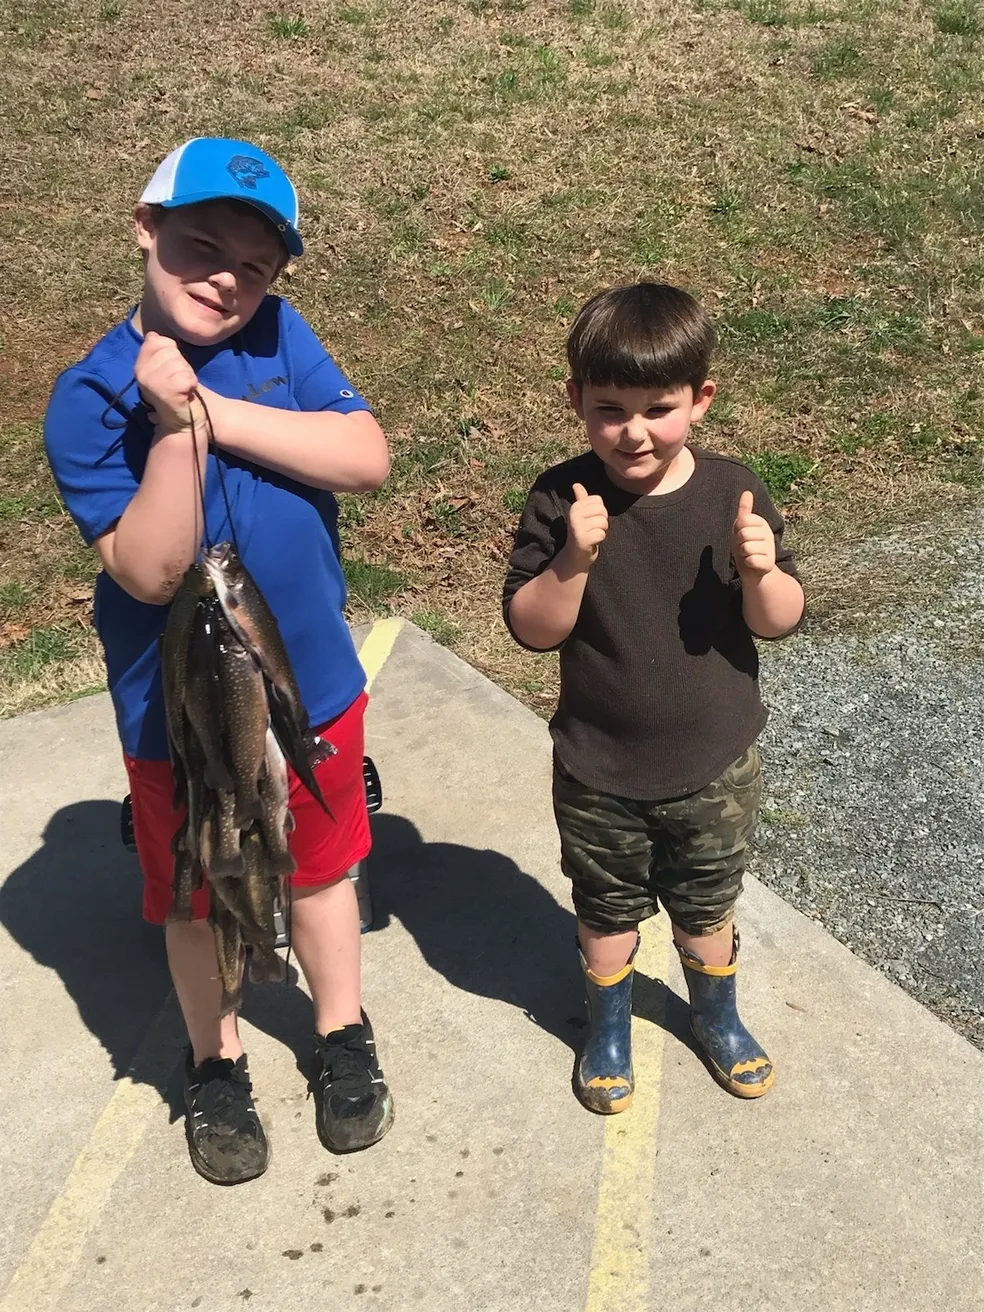 Two young boys holding fish and giving thumbs up.